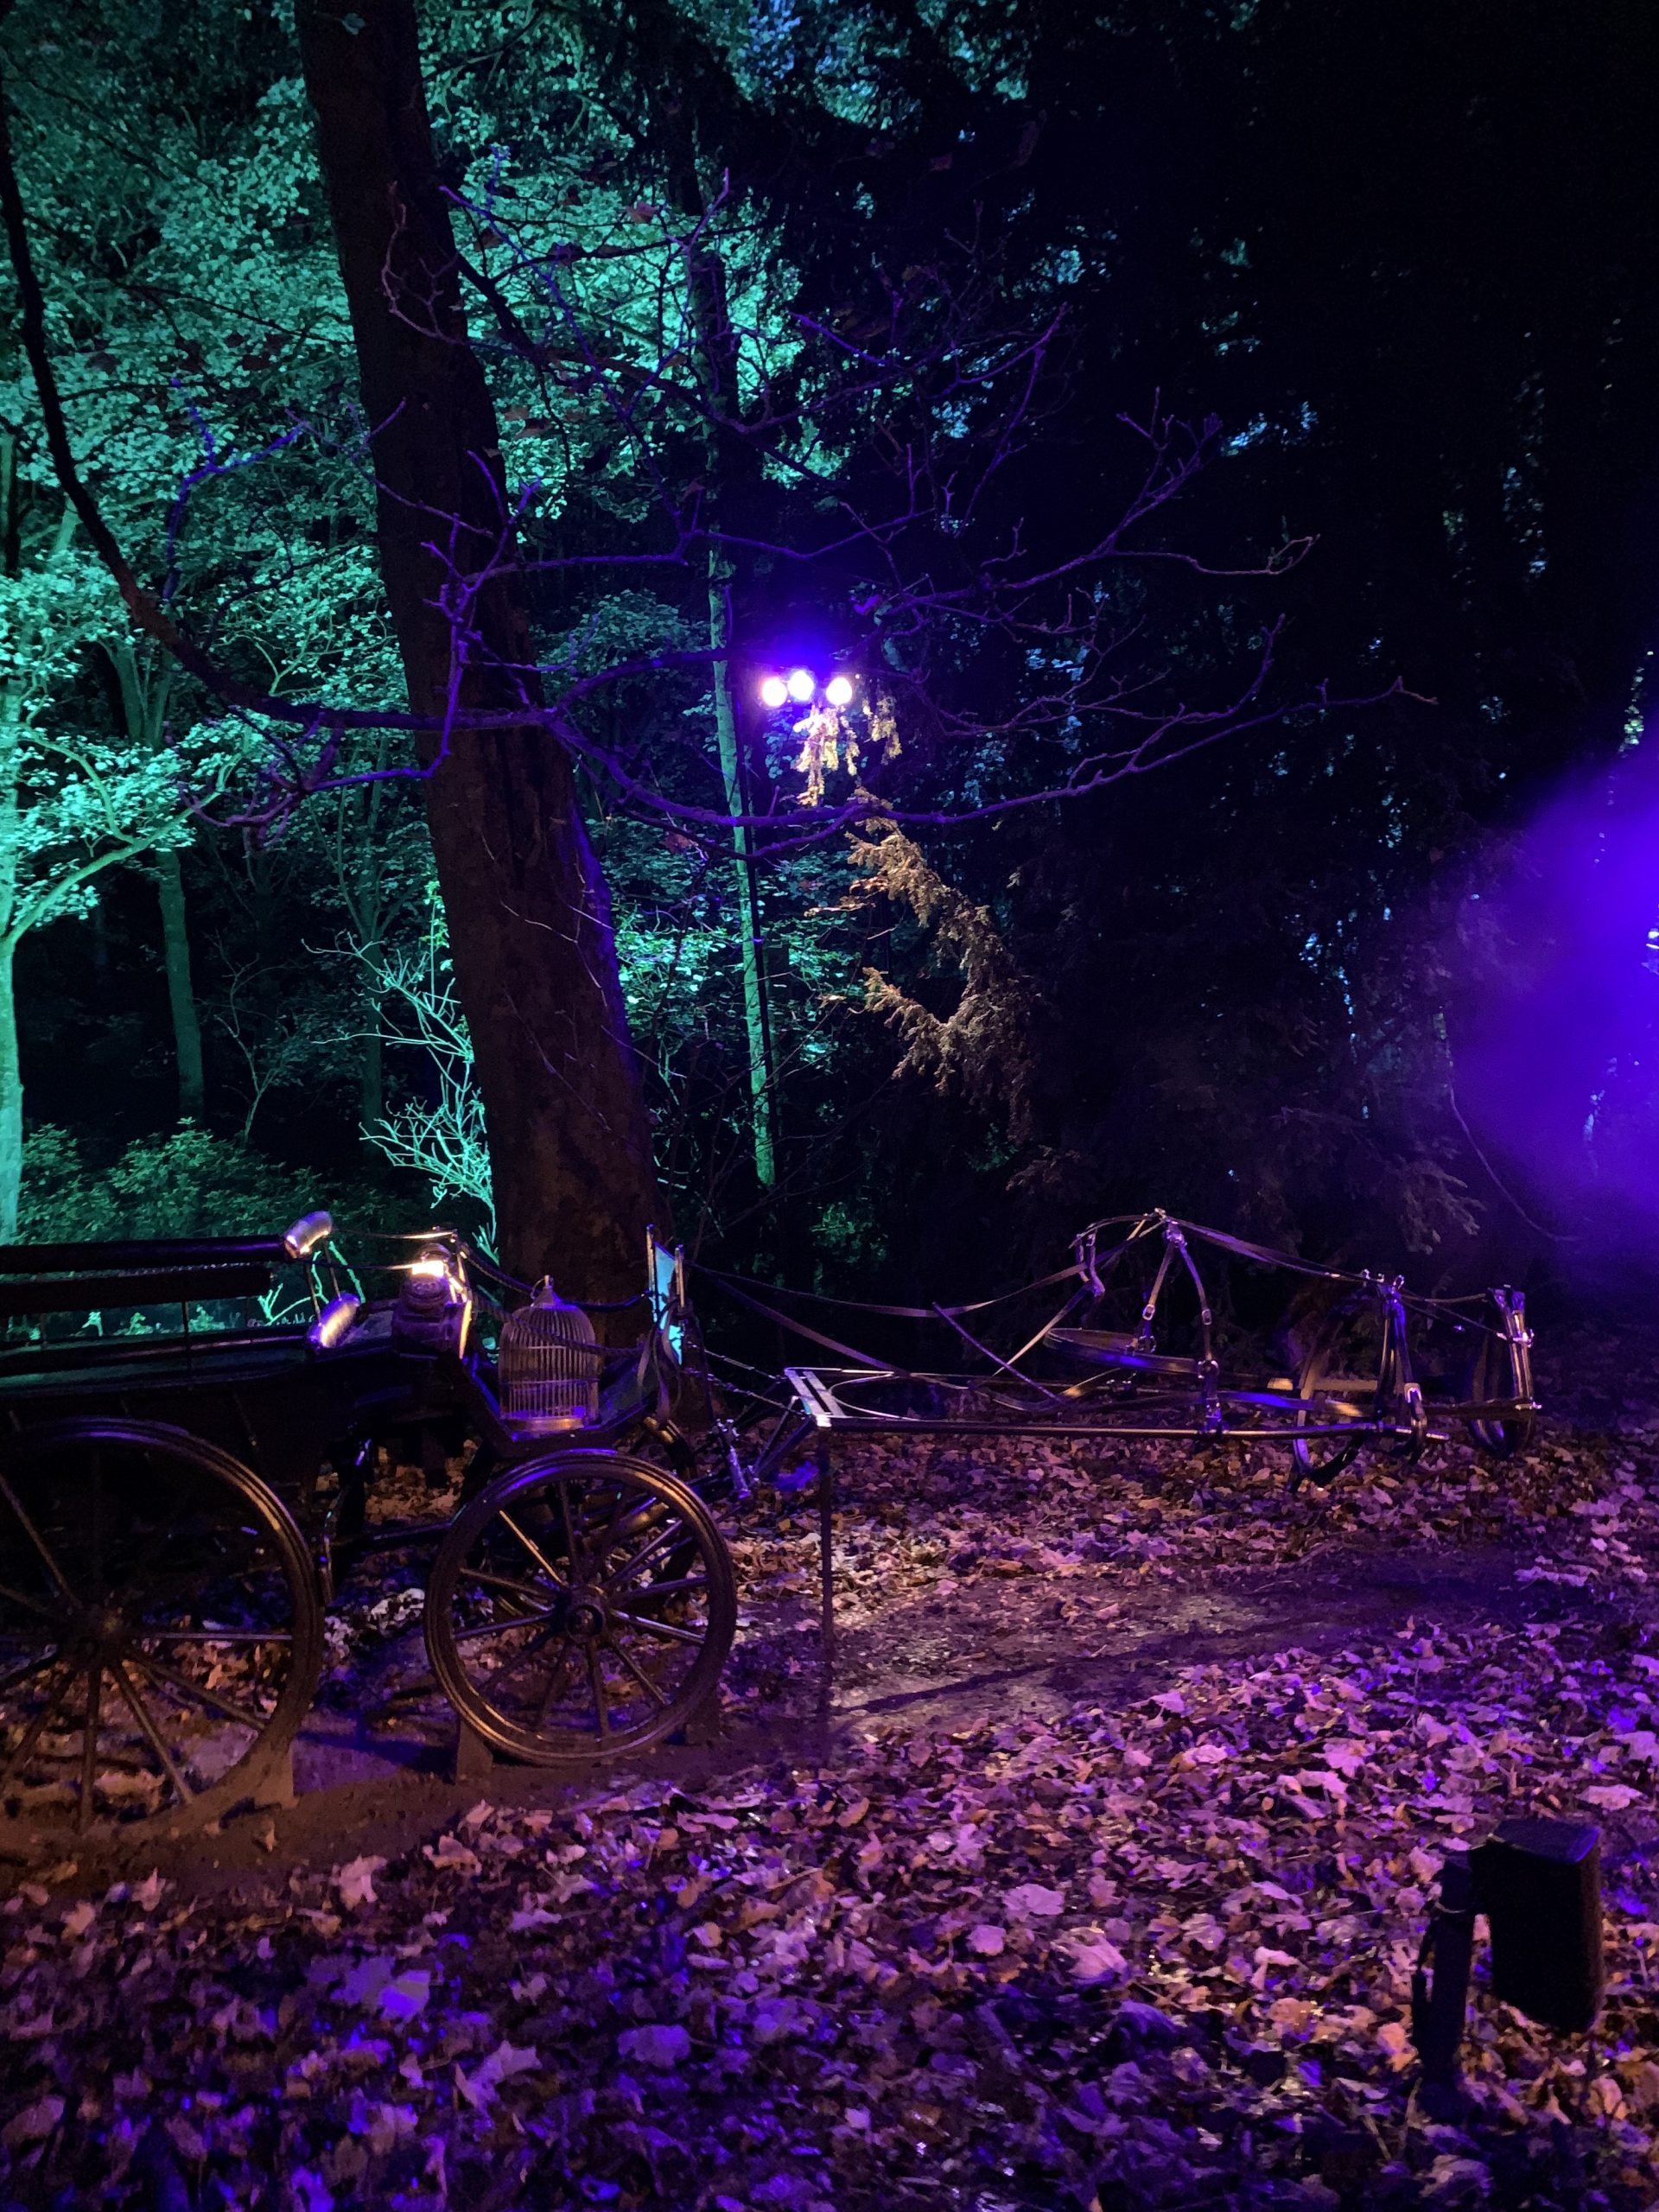 Interesting things from the Wizzarding World at the Harry Potter Forbidden Forest experience